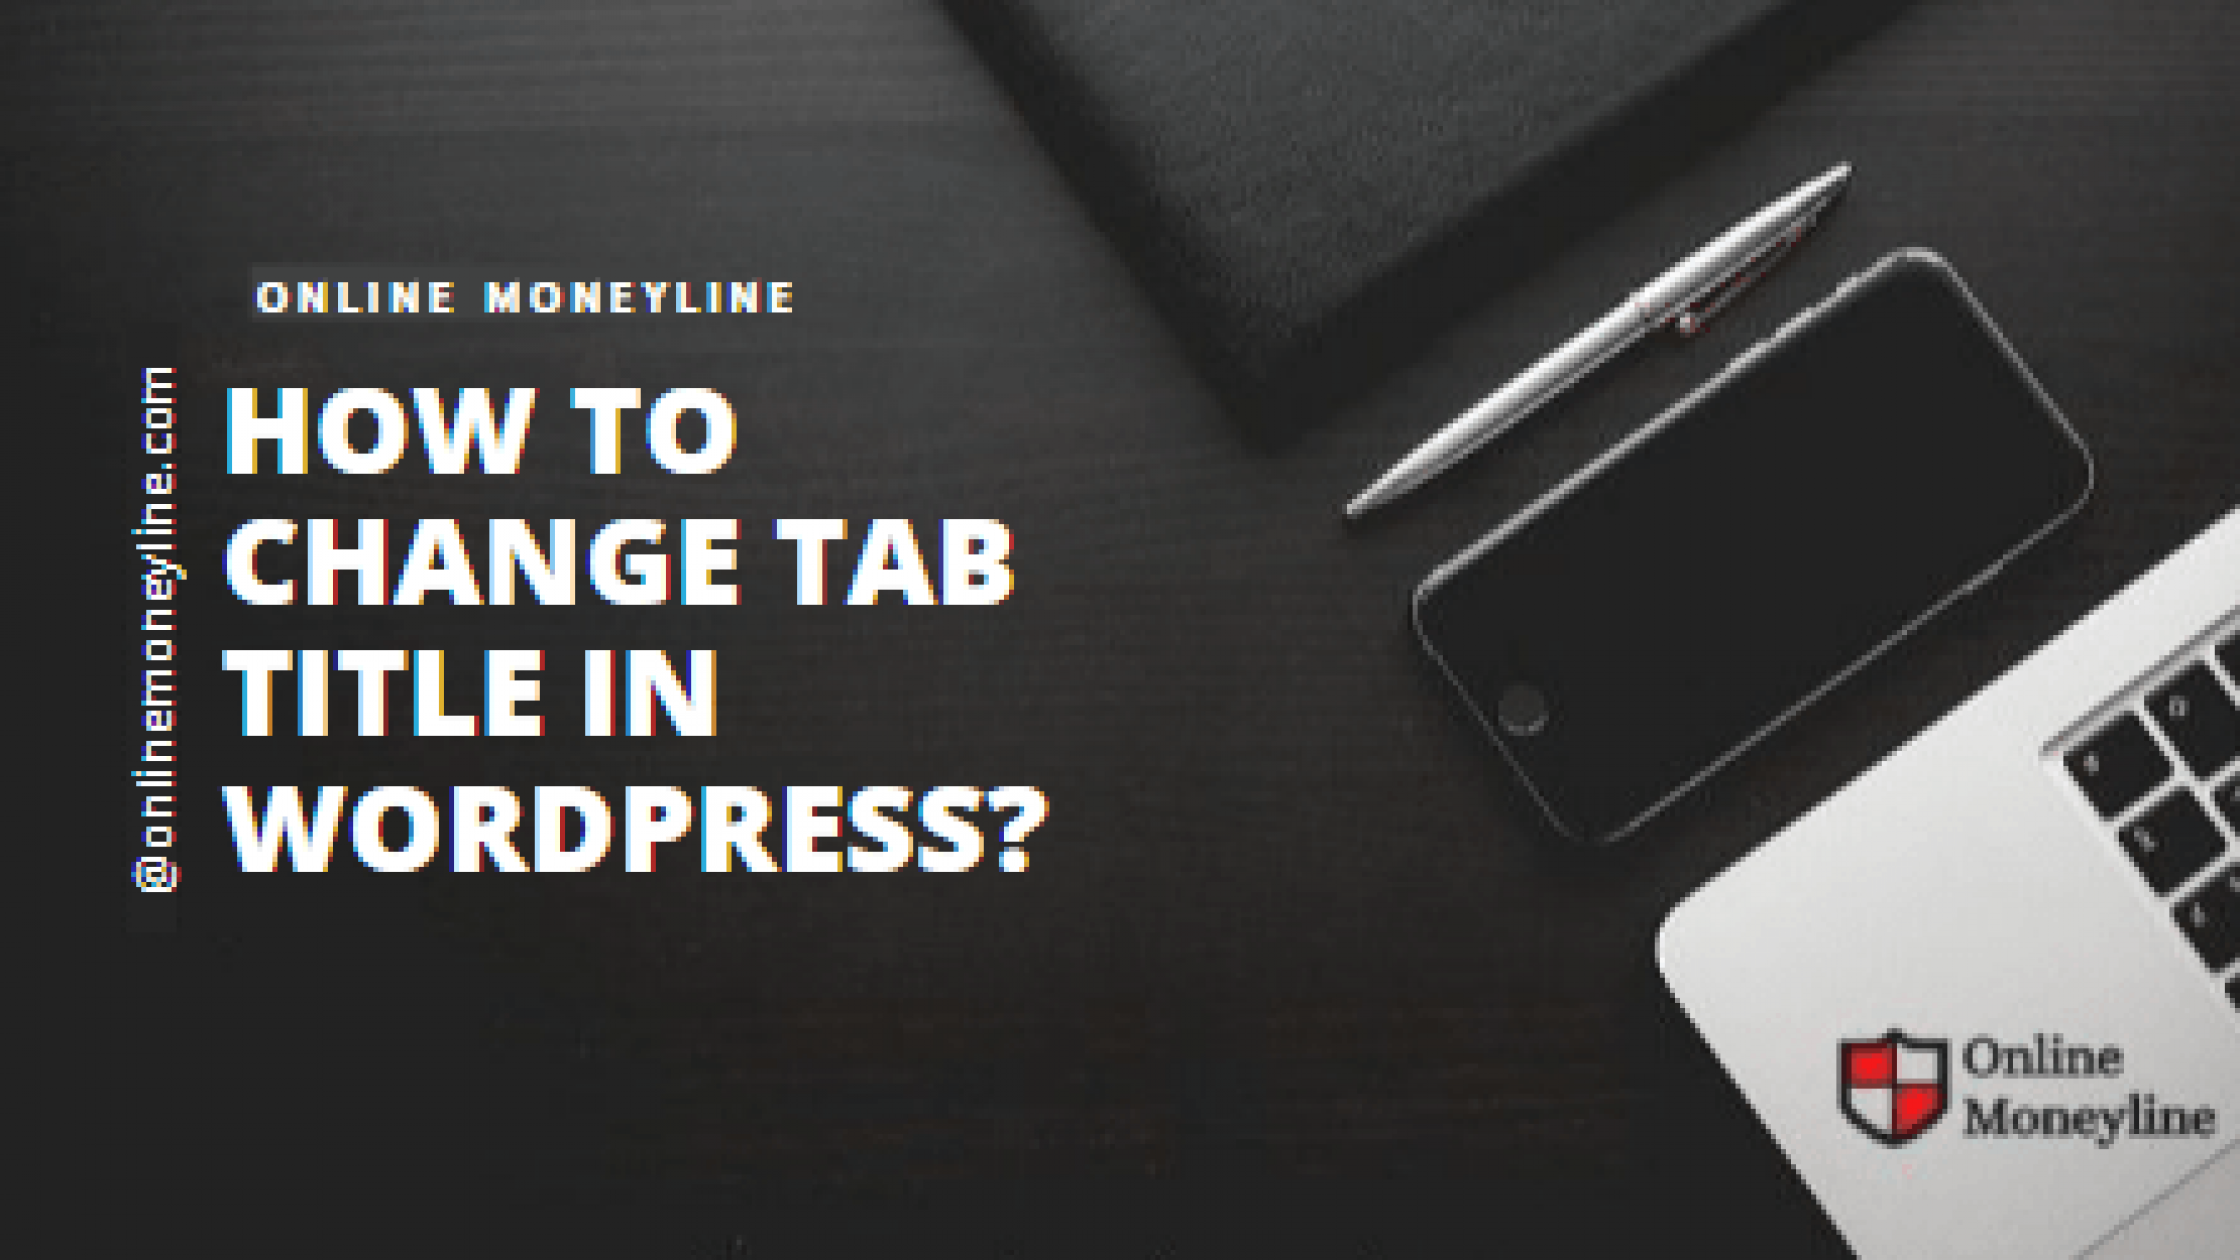 How to Change Tab Title In WordPress?